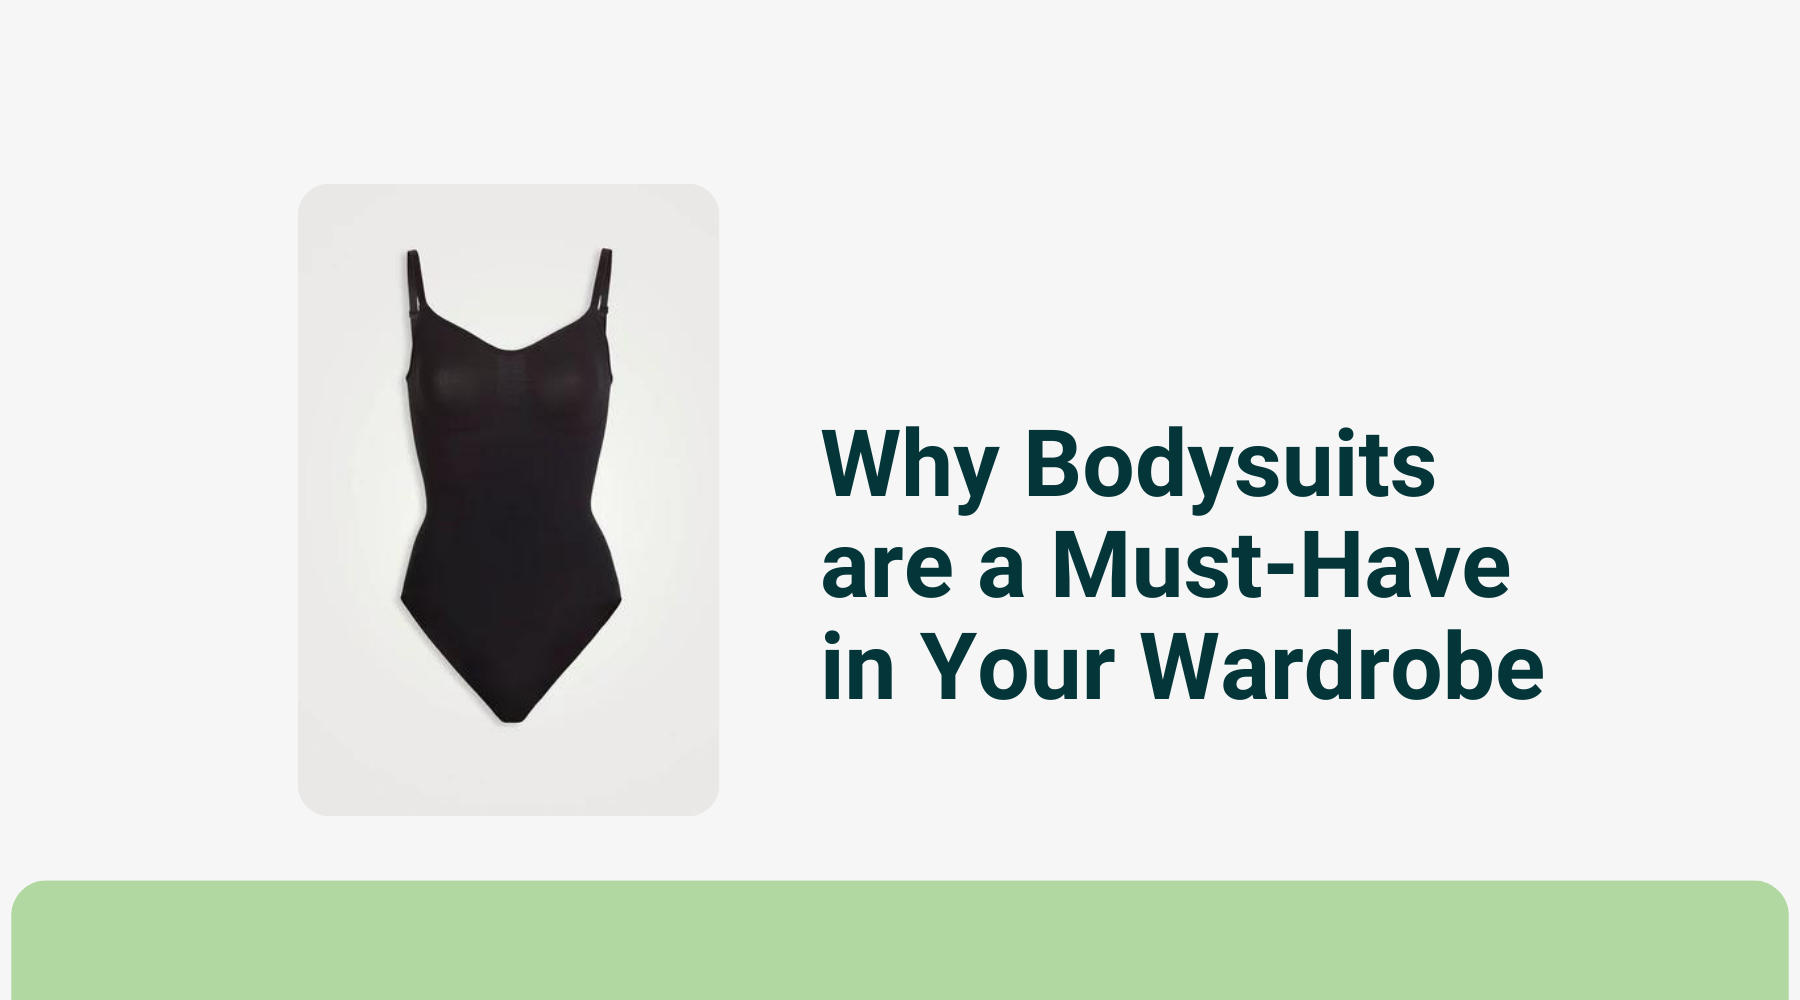 Why Bodysuits are a Must-Have in Your Wardrobe